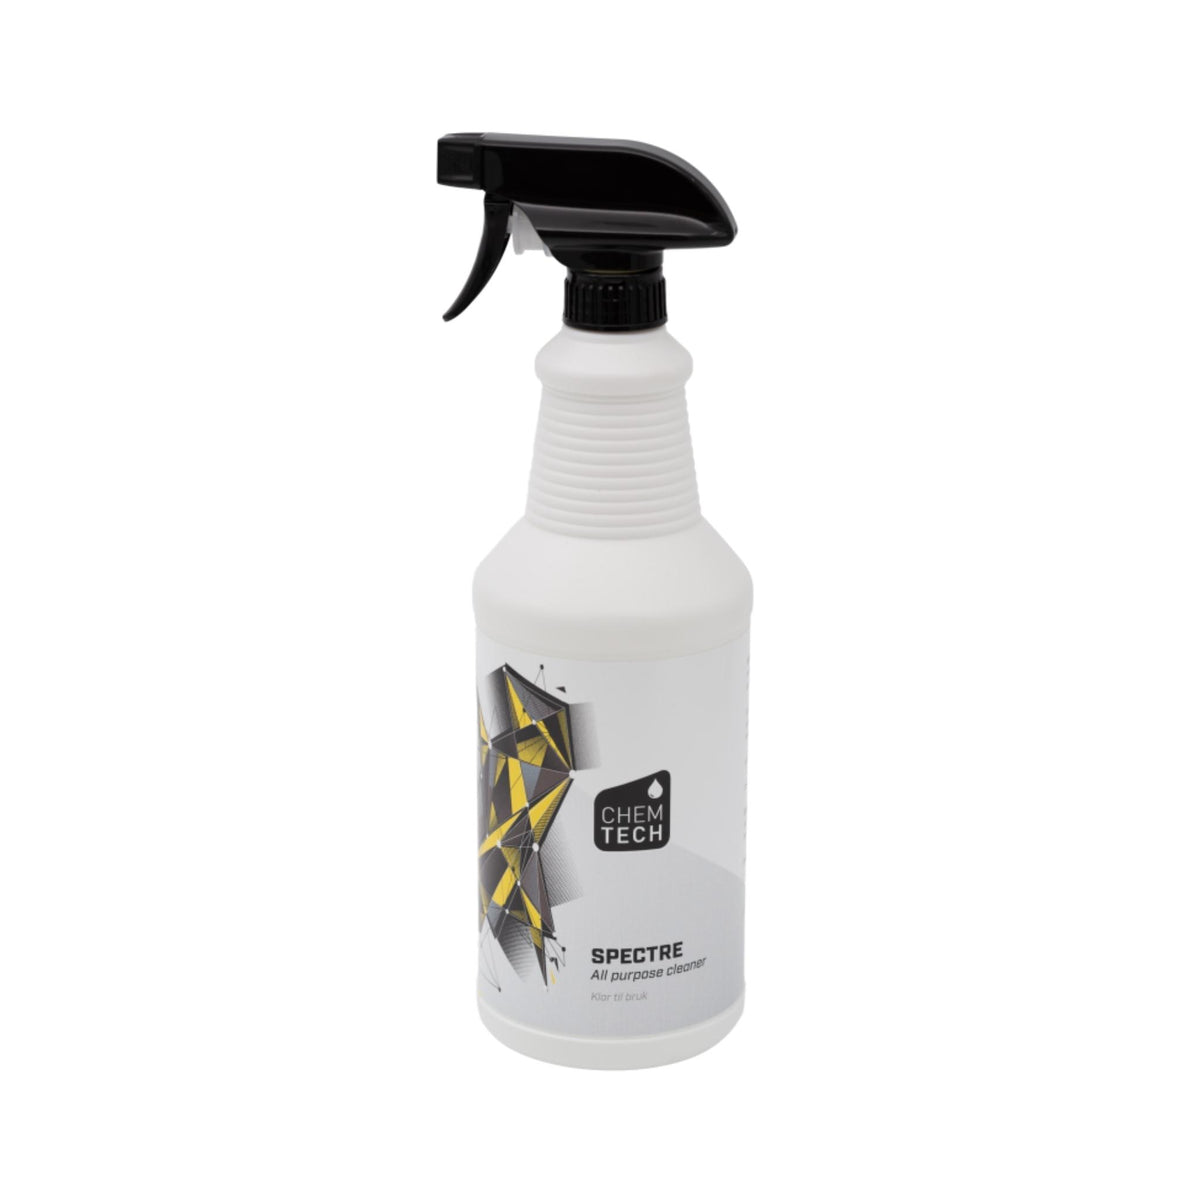 All purpose cleaner Spectre 1 ltr